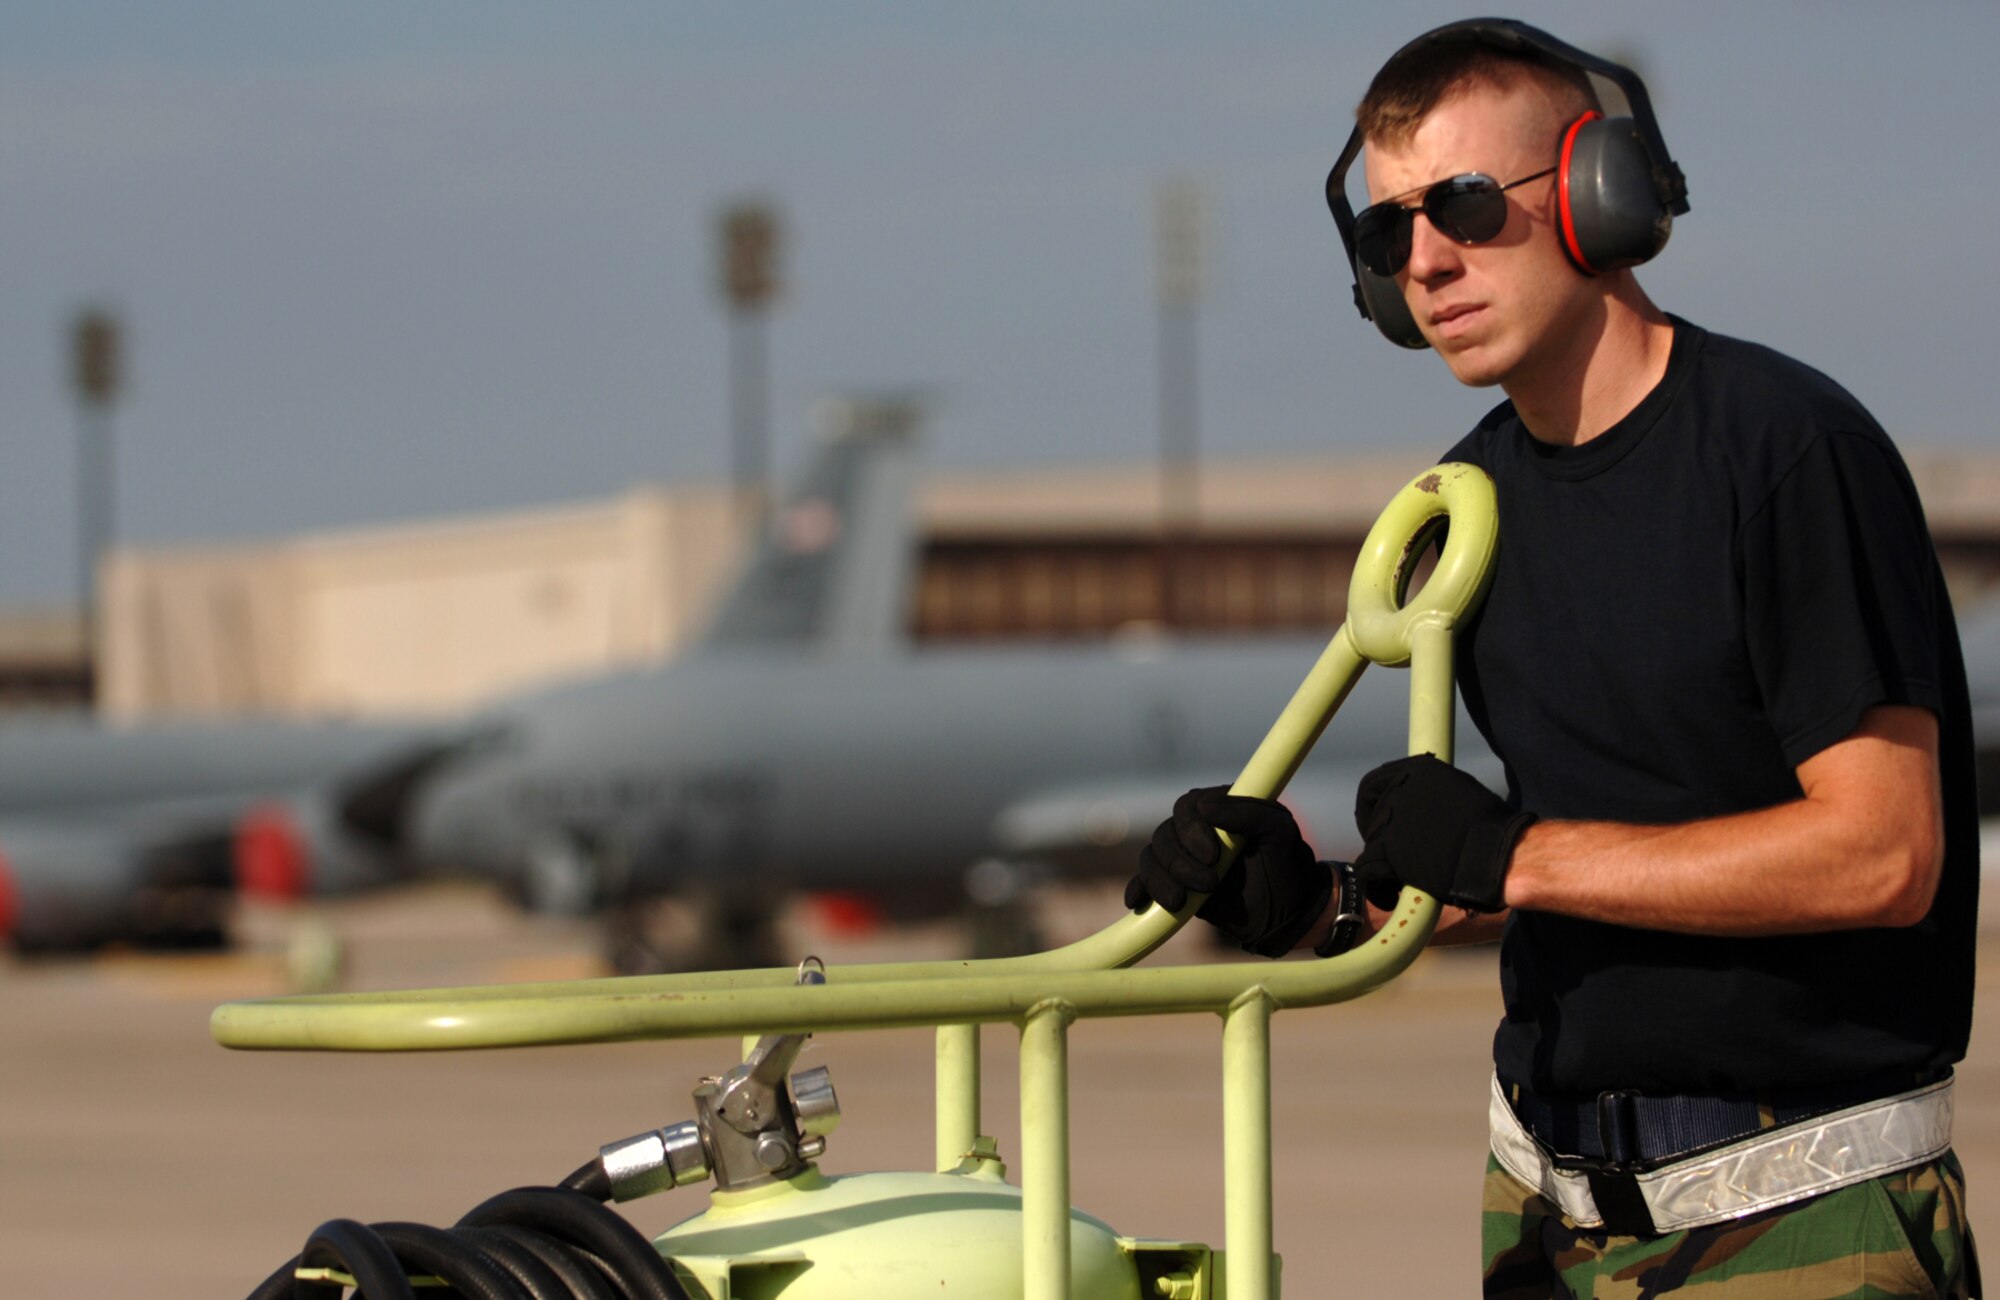 Staff Sgt. Jeremiah Babcock mans a fire extinguisher while a KC-135 Stratotanker is refueled on the flightline of McConnell Air Force Base, Kan., on Sept. 2.  Sergeant Babcock is a traditional Reservist assigned to the Communications and Navigation section of the 931st Aircraft Maintenance Squadron, but he often performs fireguard and other crew chief duties to help fill in for deployed active-duty maintainers. (U.S. Air Force photo/Tech. Sgt. Jason Schaap)    